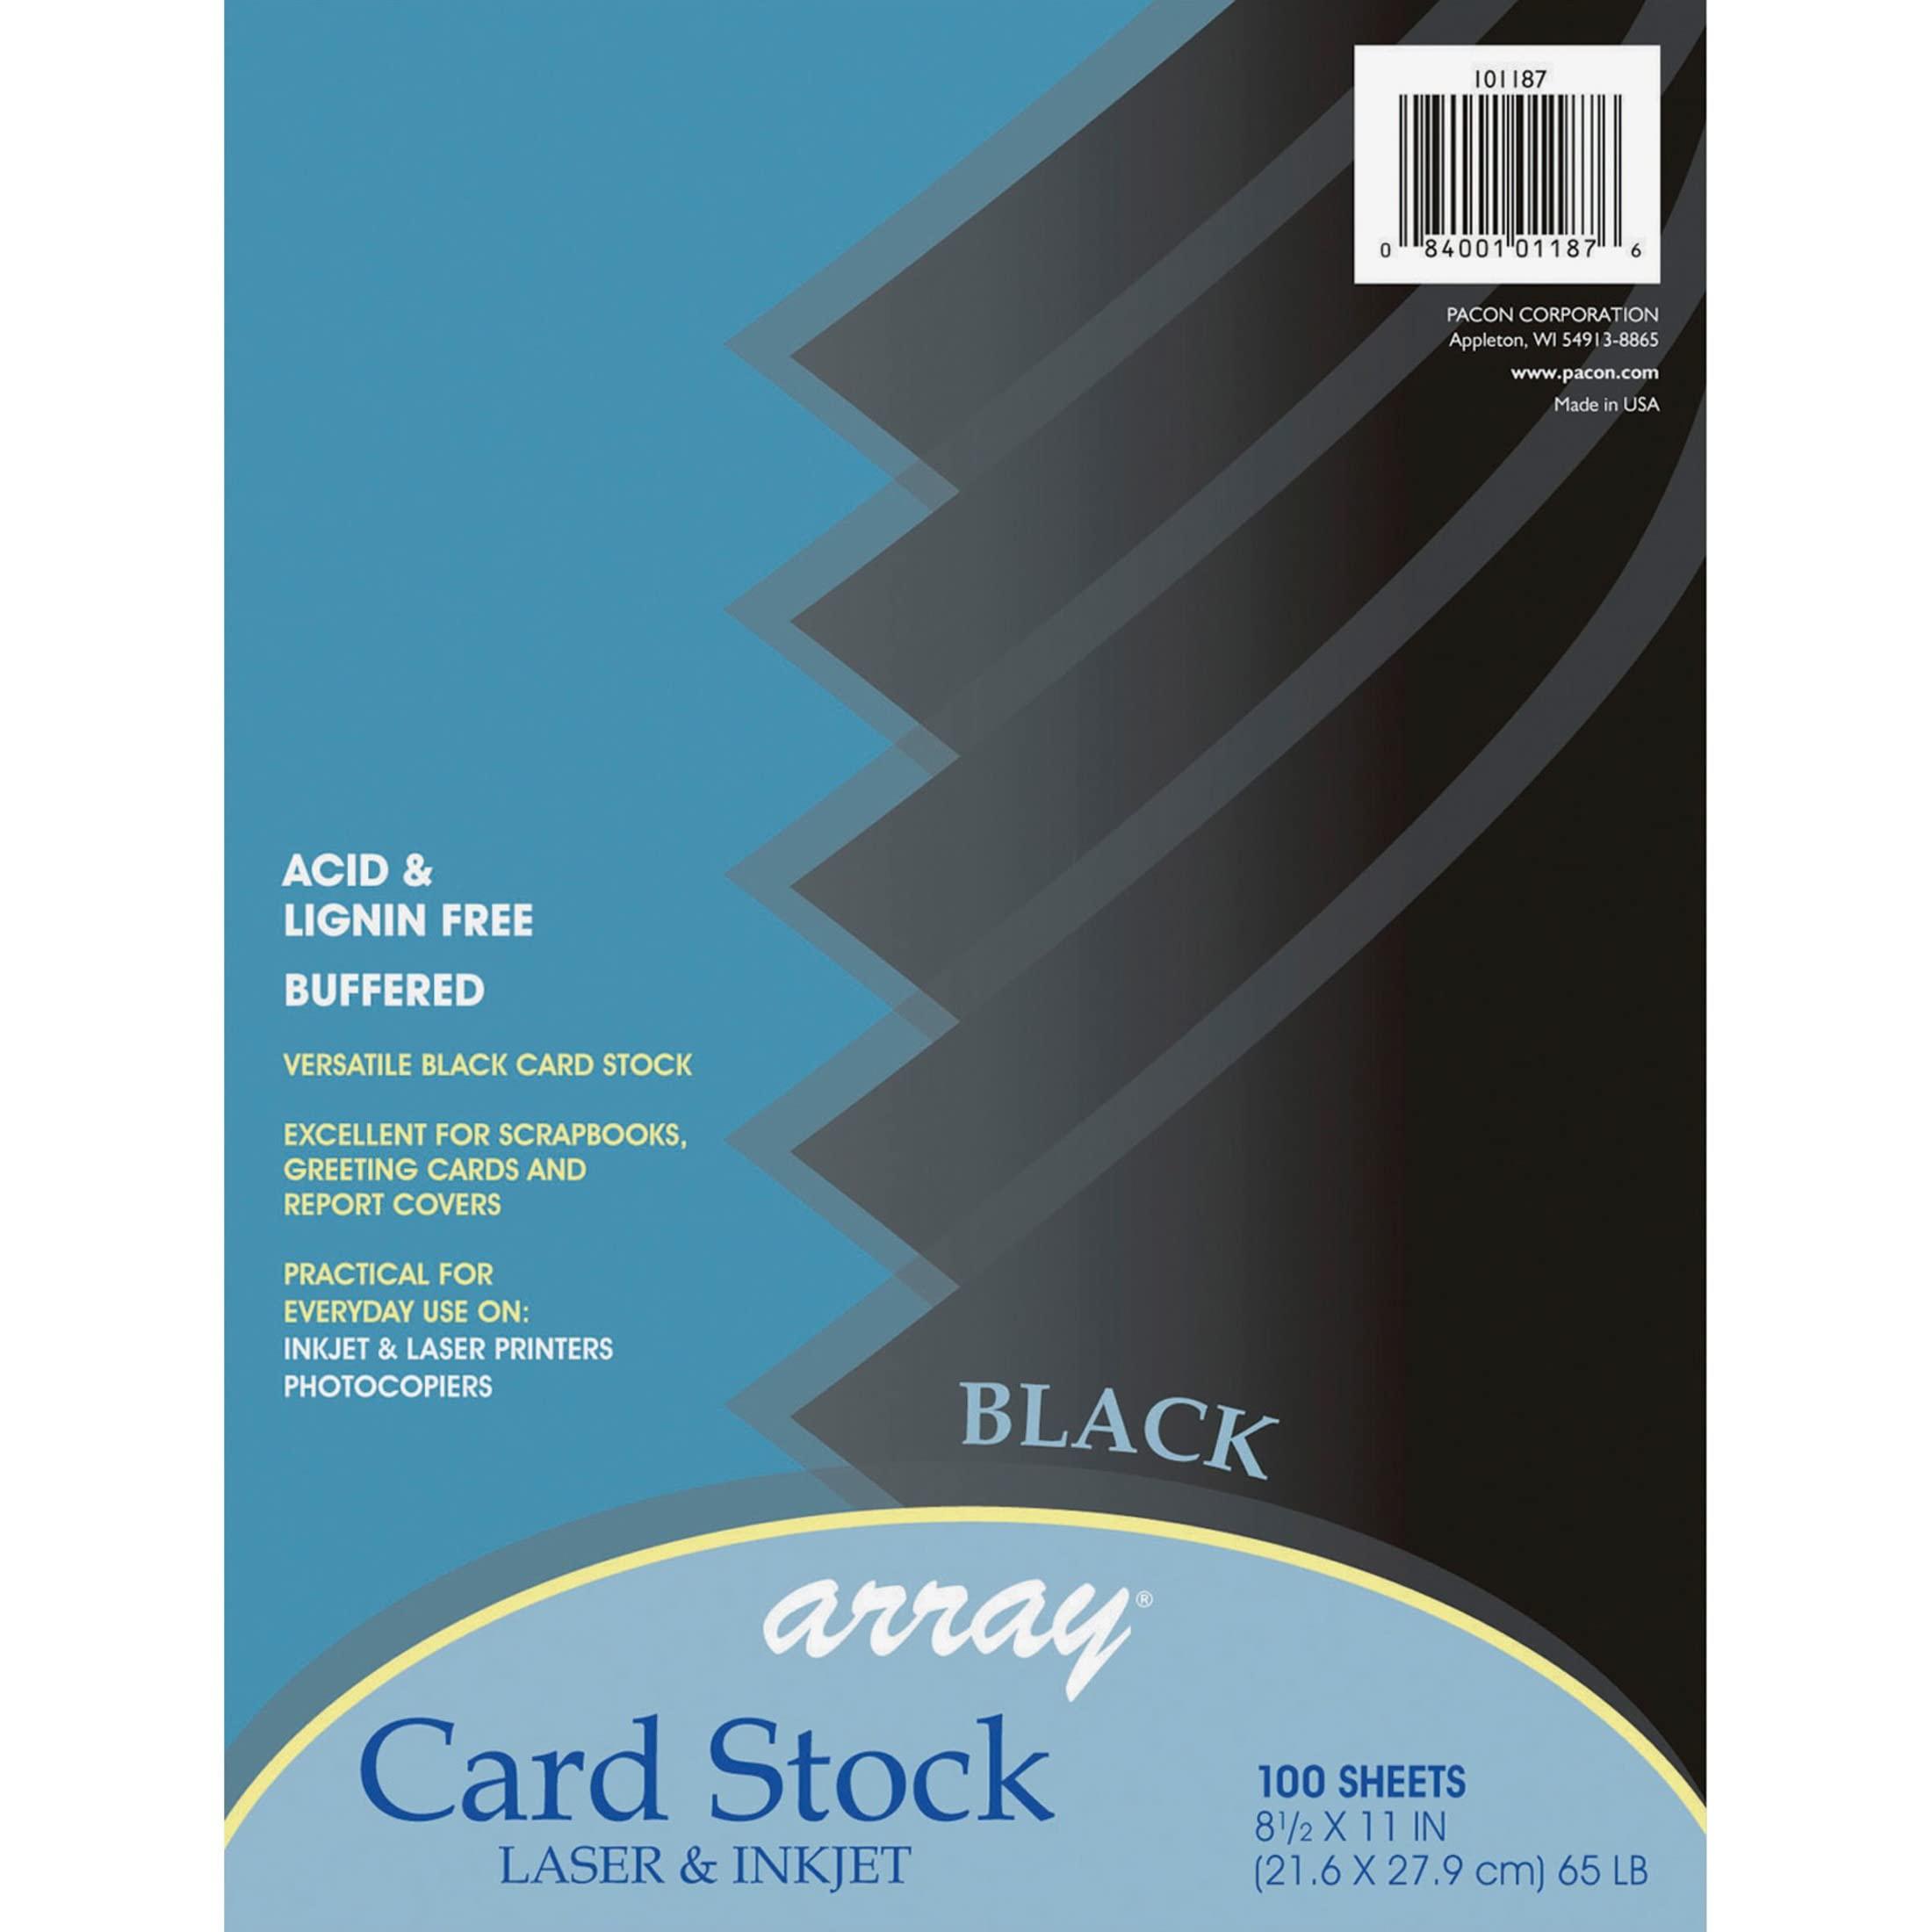 Array Card Stock pacon card stock, classic black, 8-1/2" x 11", 100 sheets